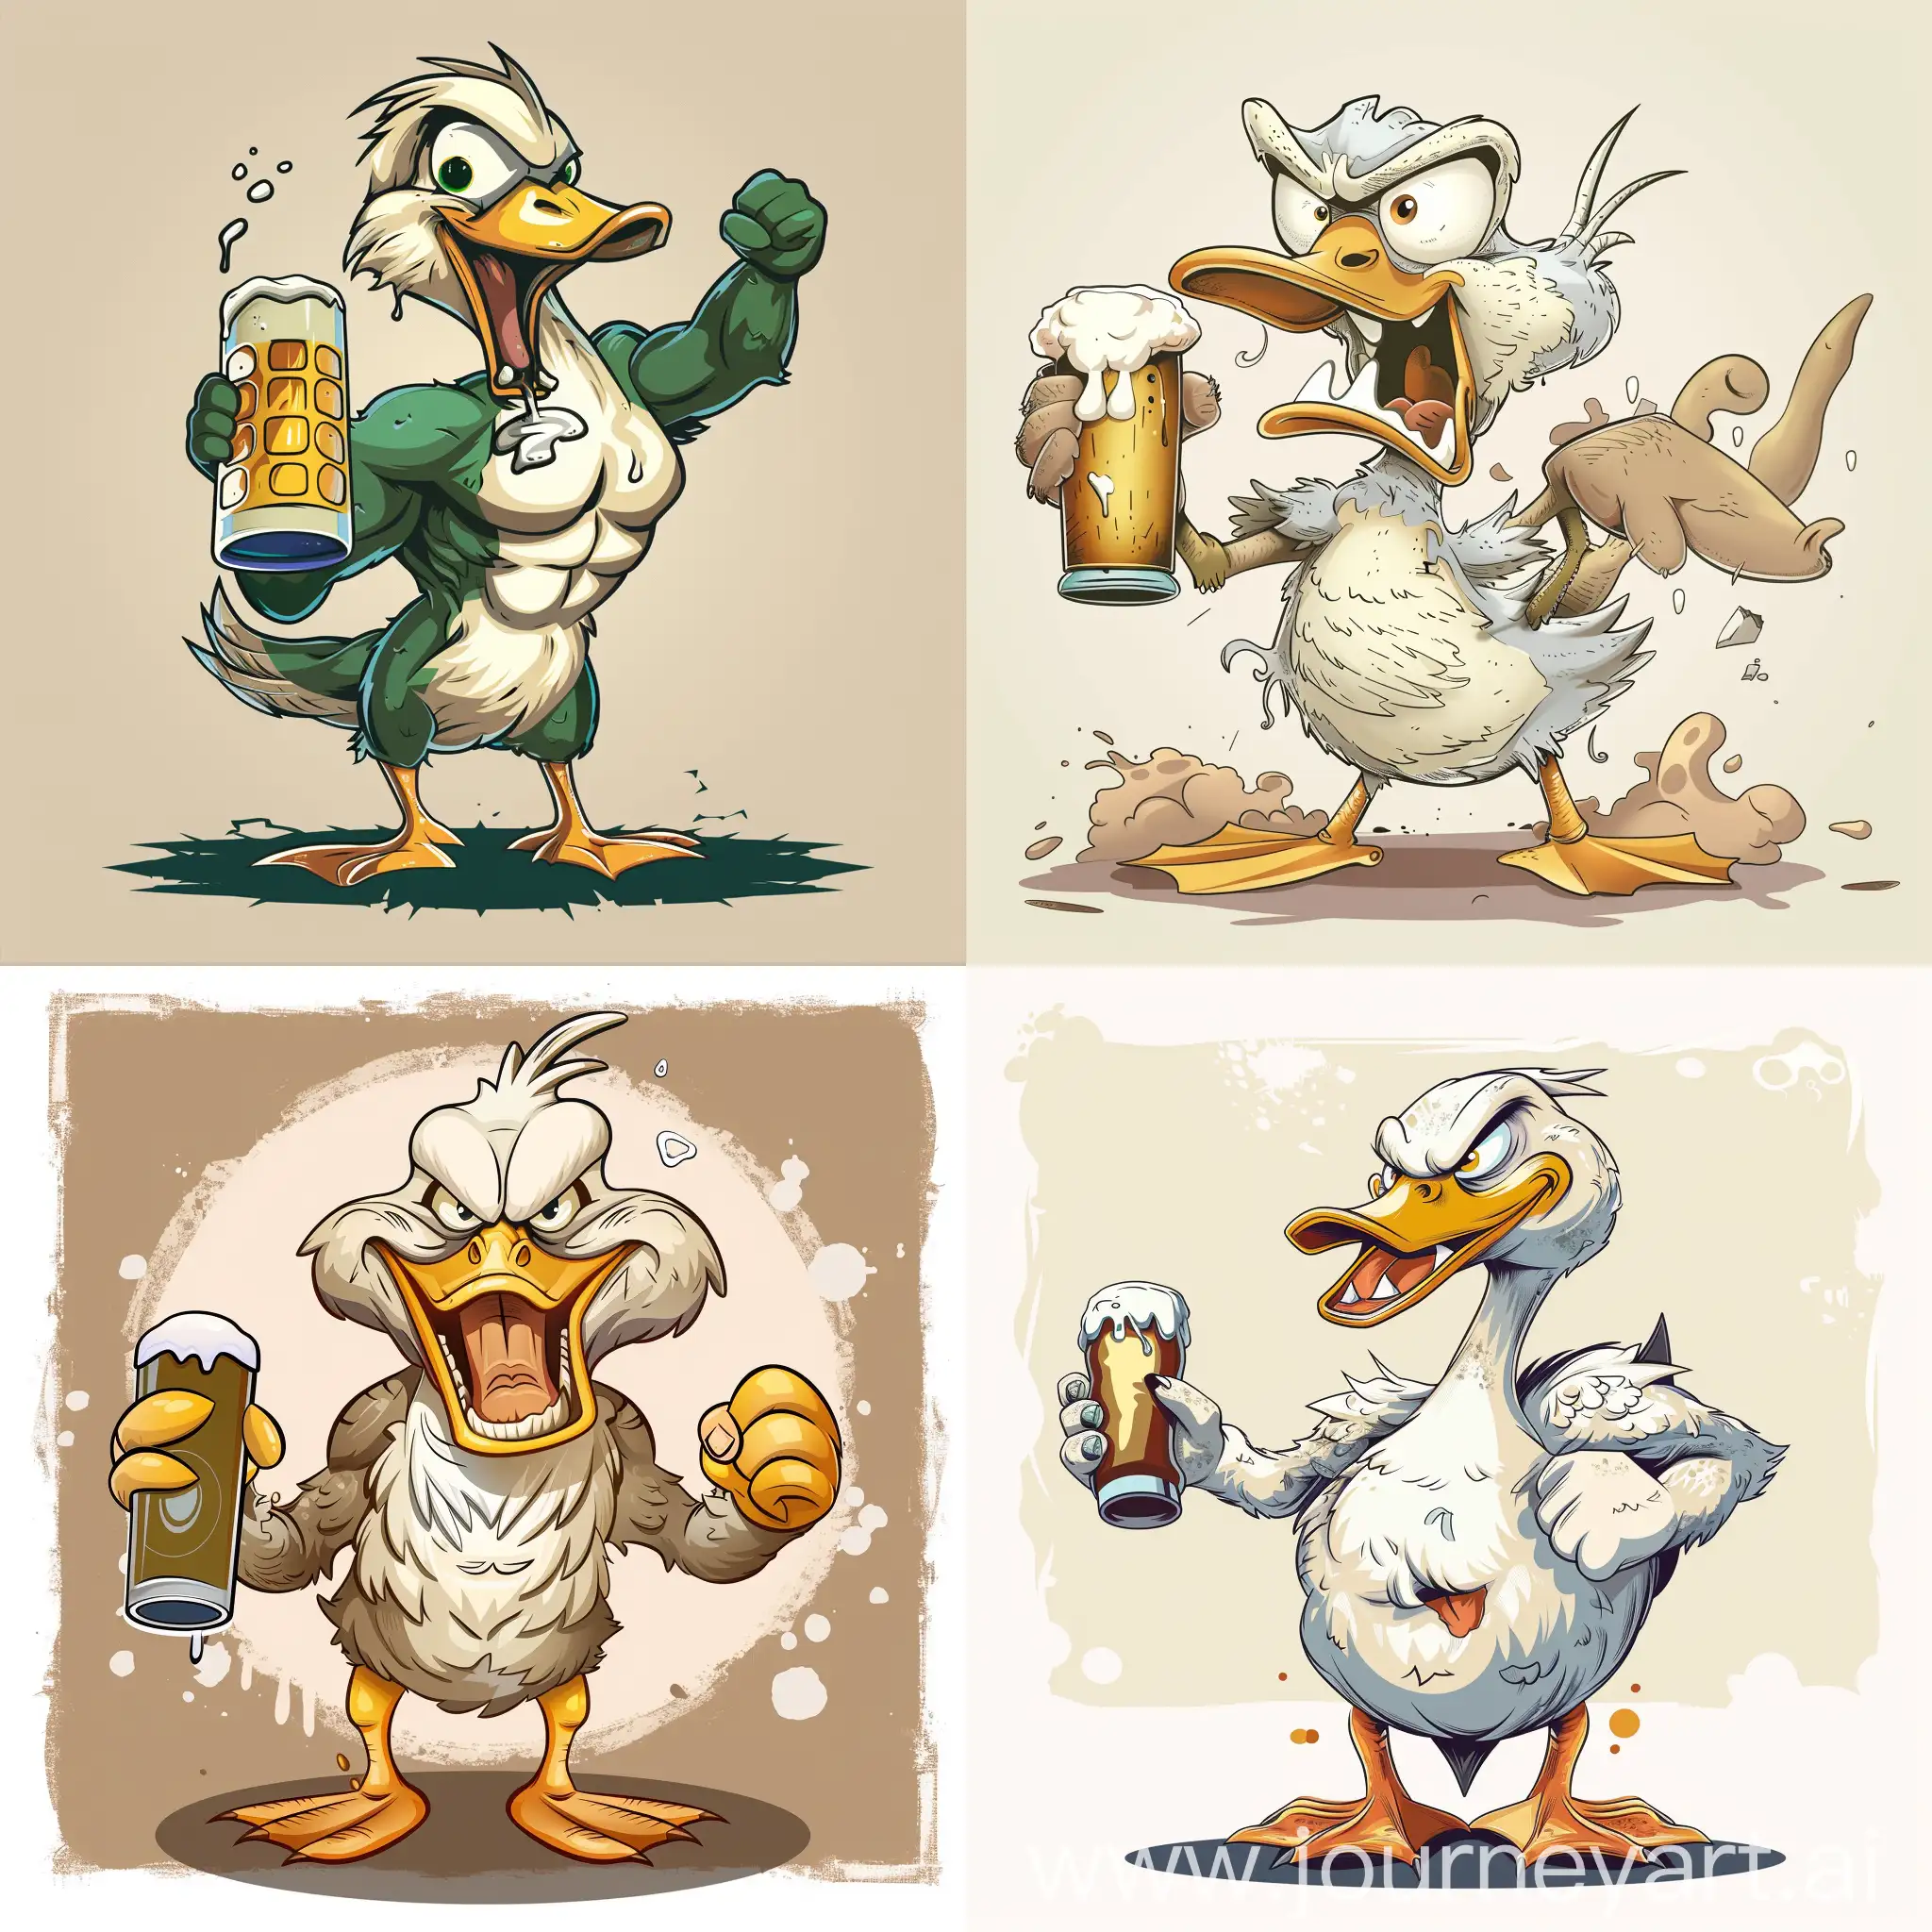 AN ANGRY AND MUSCULOUS DUCK IN CARTOON STYLE WITH A BEER IN HAND